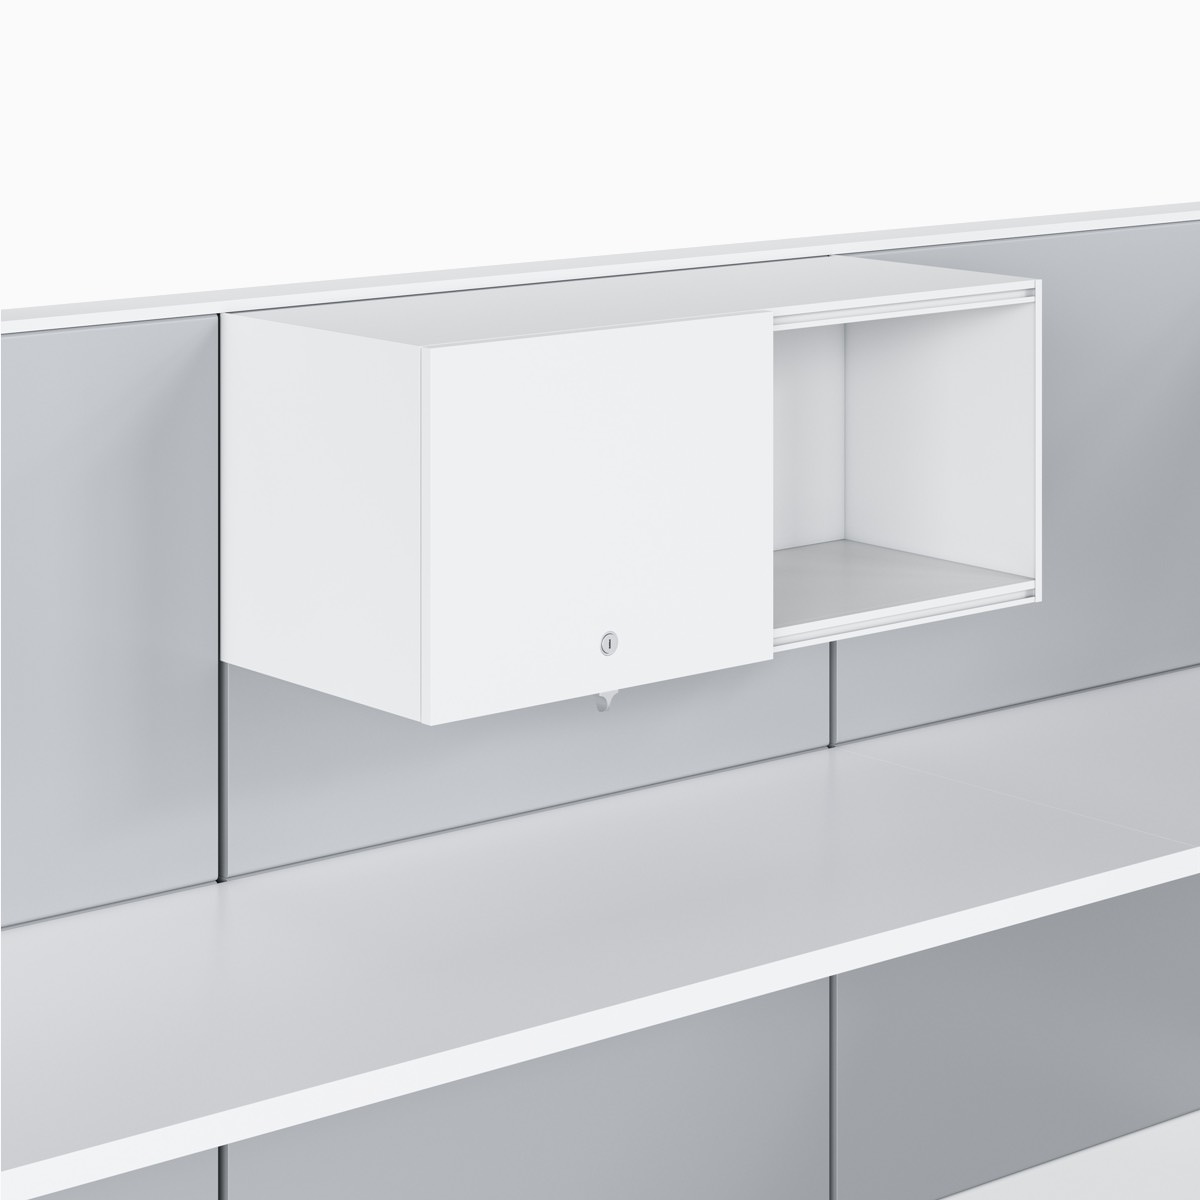 Ethospace wall unit in white trim and light gray tiles with an upper storage unit with a sliding door in a white finish hung above a white solid surface work surface.